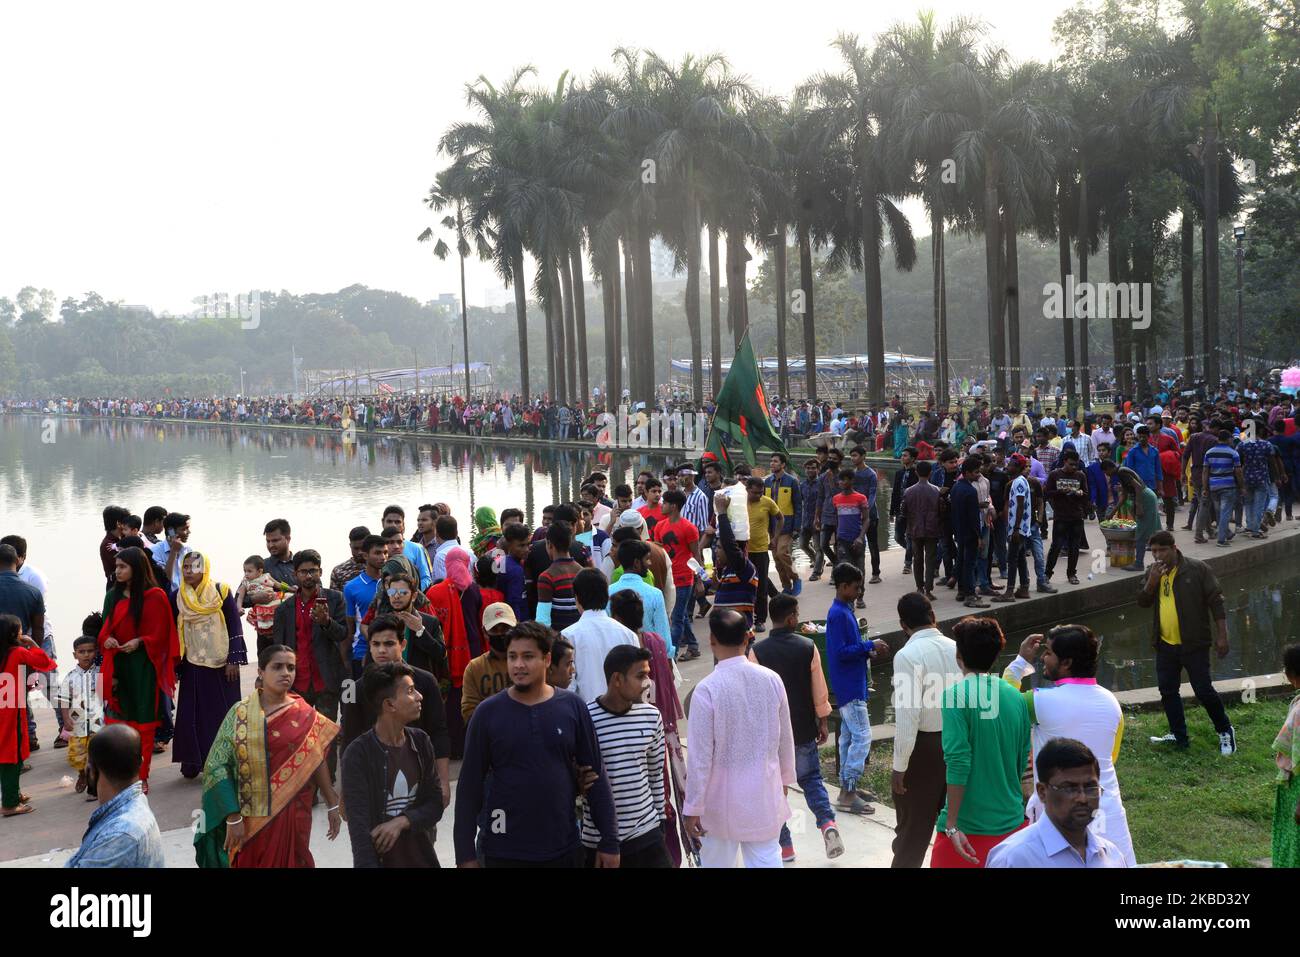 Bangladeshi People goatherd at the Victory Day celebrations ceremony in Dhaka, Bangladesh on December 16, 2019. Bangladesh marks its 49th Victory Day to commemorate the victory of the Allied forces High Command over the Pakistani forces in the Bangladesh Liberation War in 1971. Bangladesh became a free nation on 16 December 1971 after a nine-month bloody war with Pakistan. (Photo by Mamunur Rashid/NurPhoto) Stock Photo